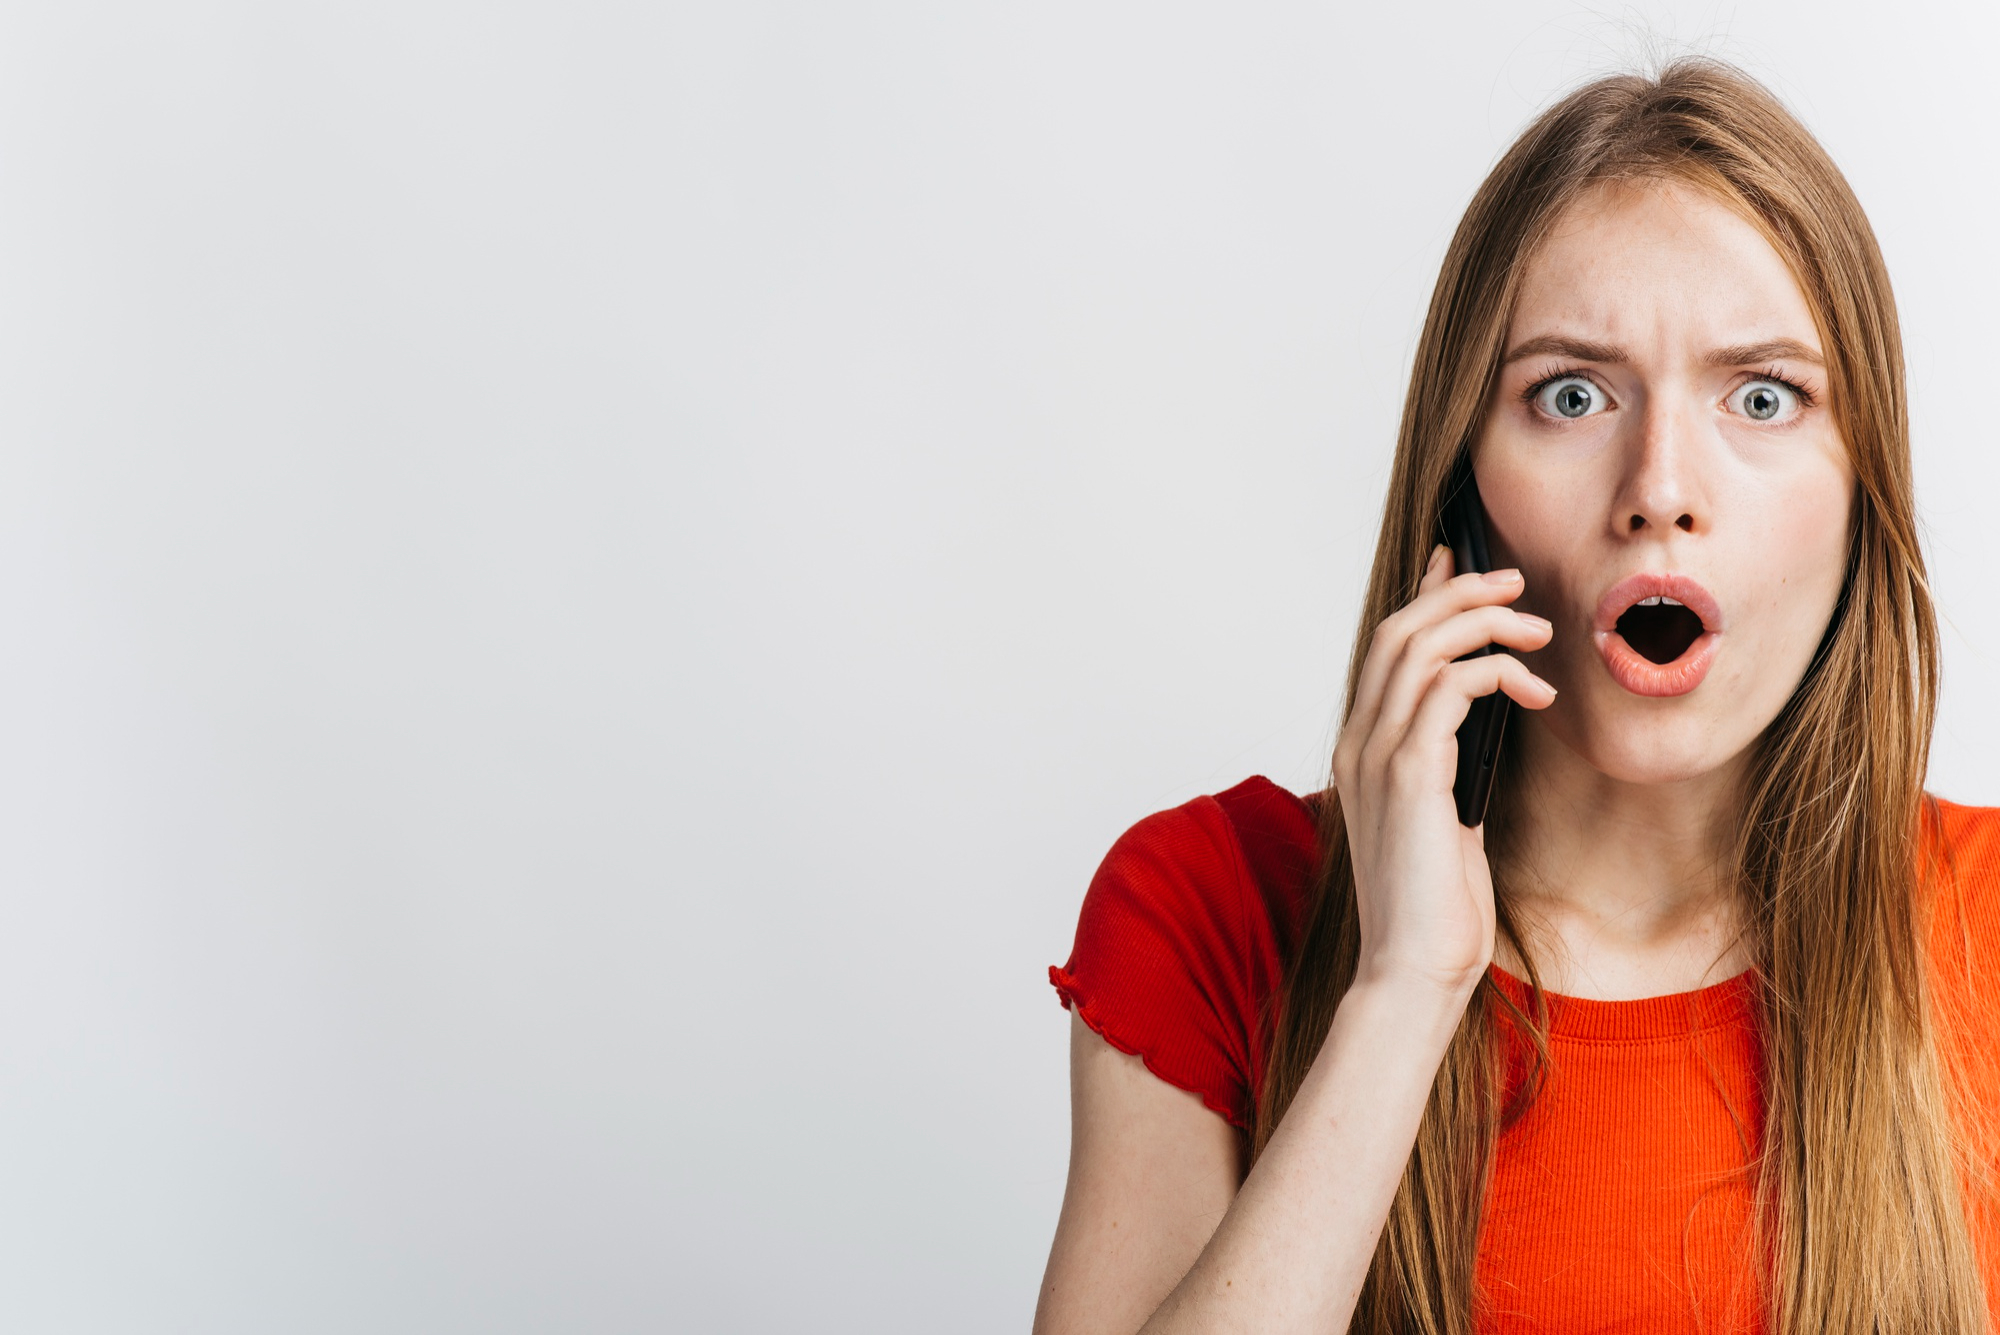 A woman reacting in shock while on a phone call | Source: Freepik